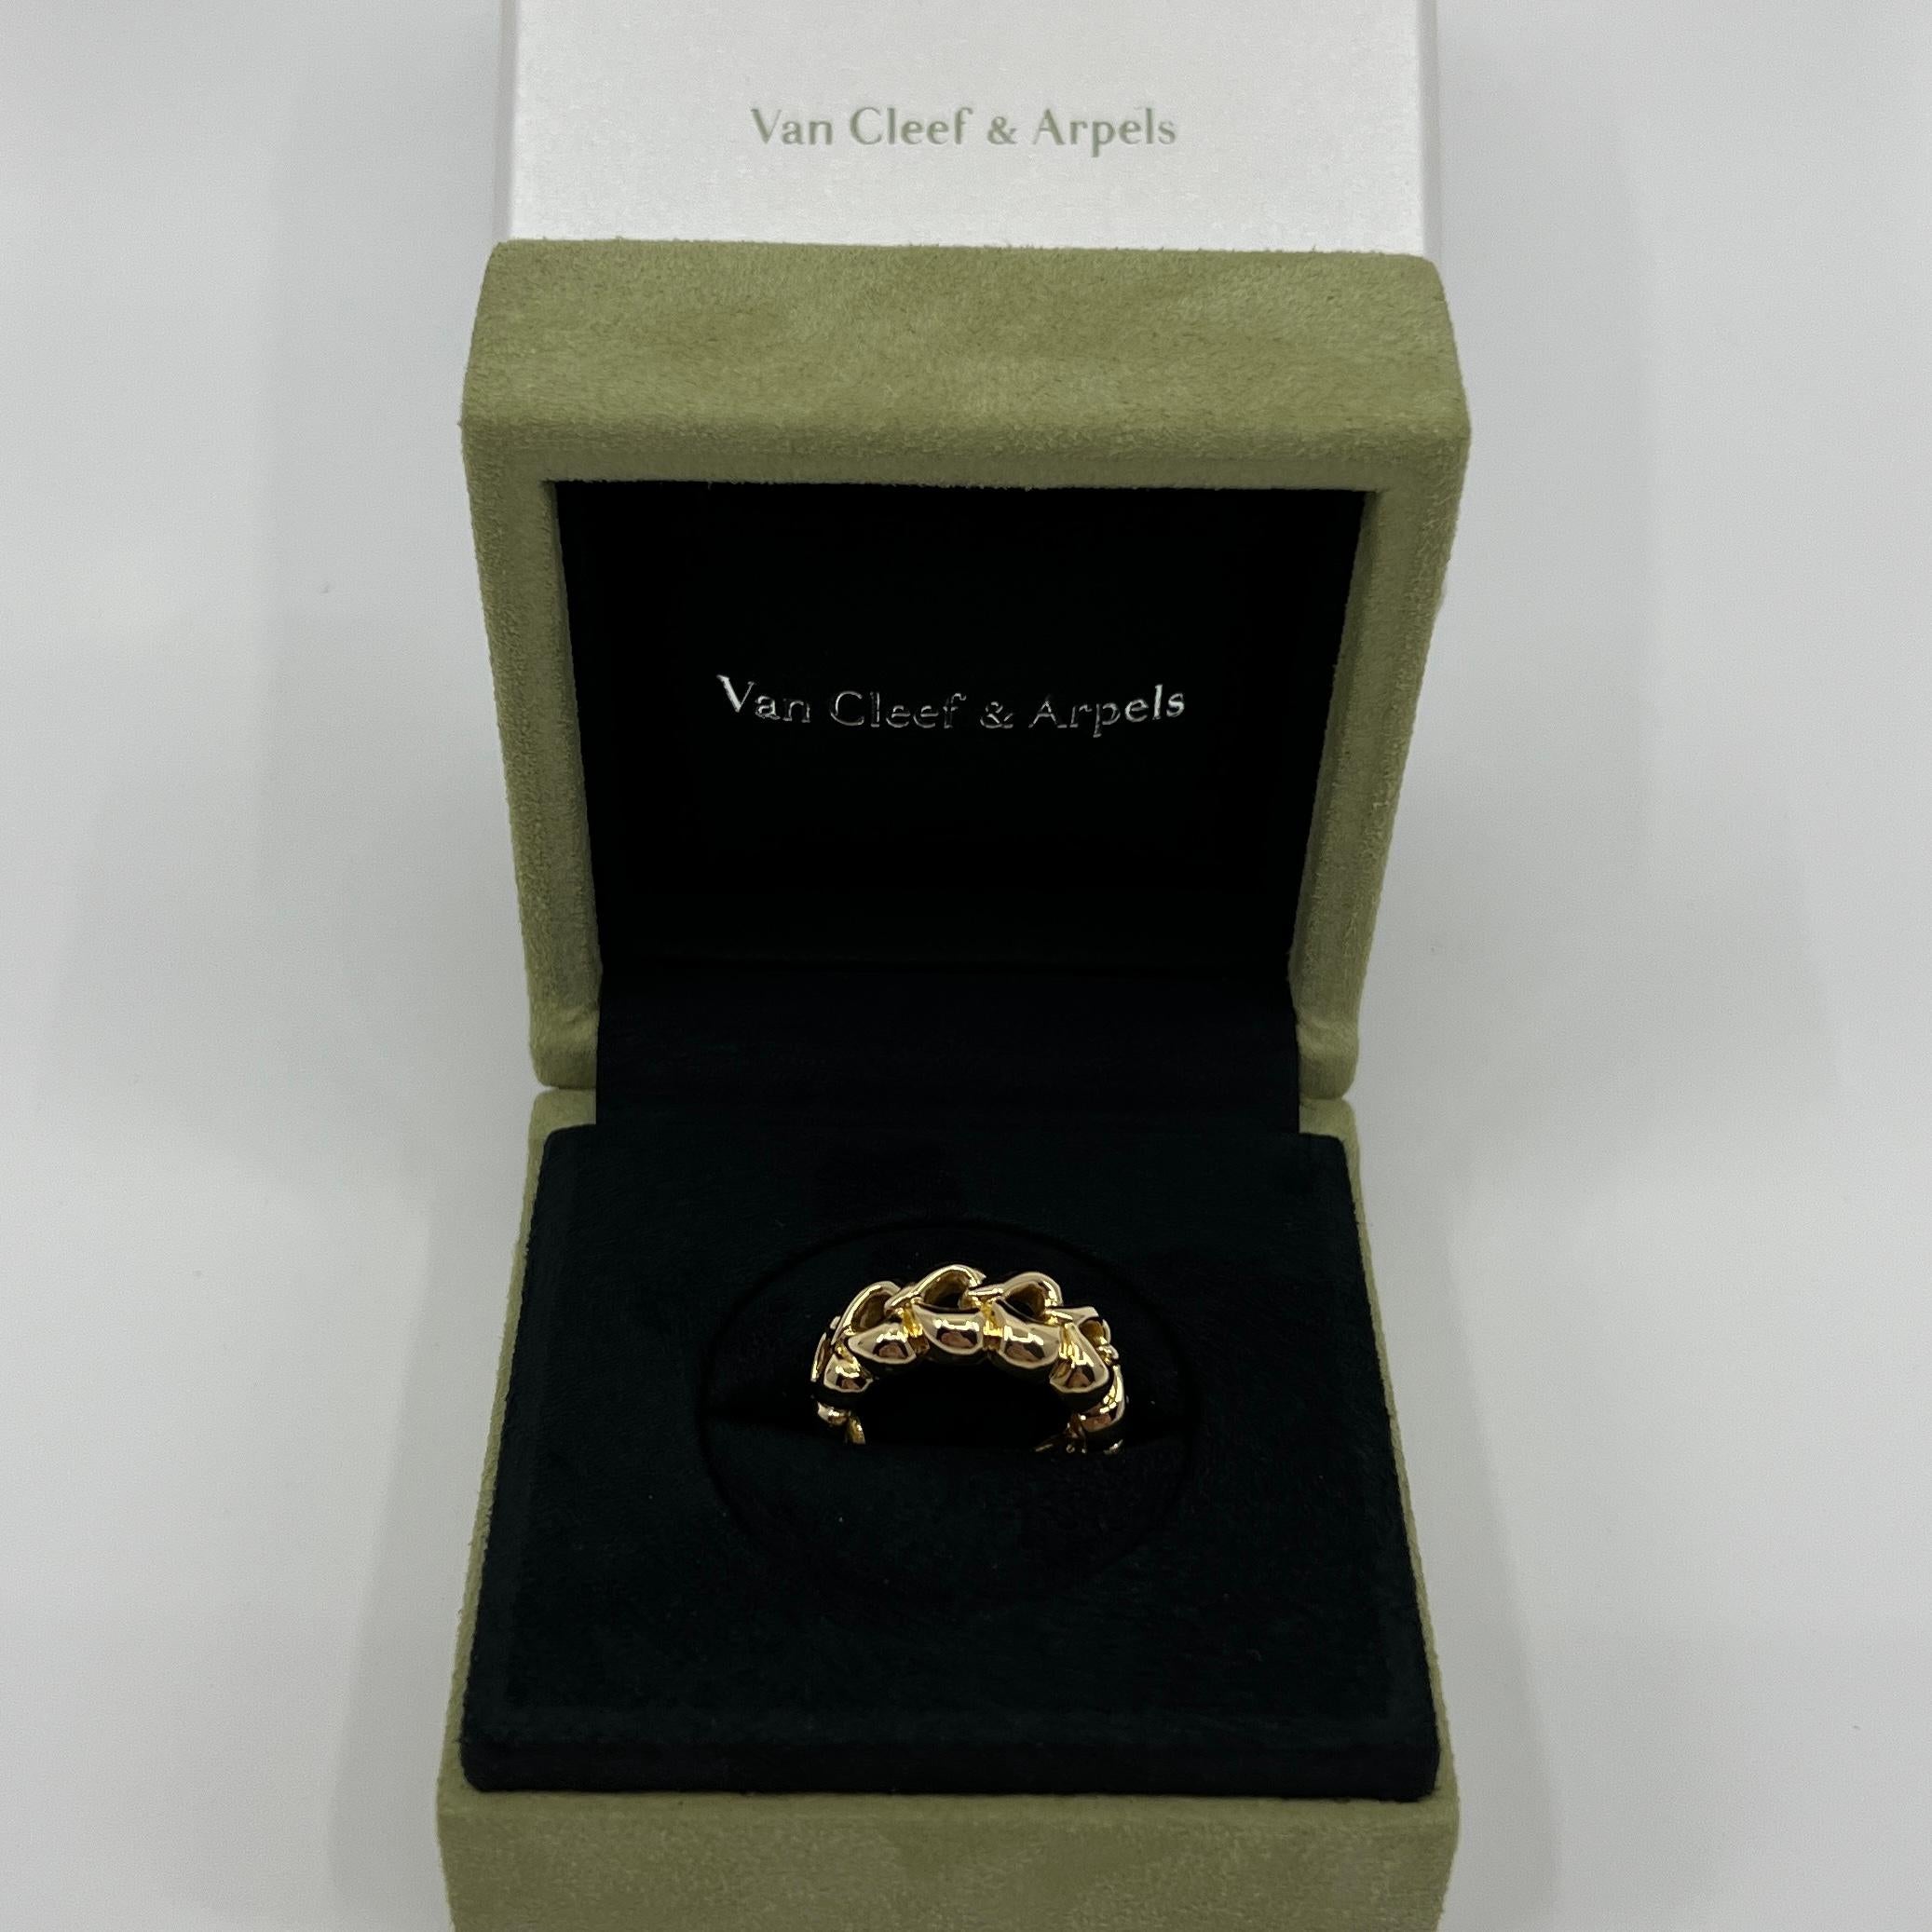 Rare Van Cleef & Arpels 18k Yellow Gold Open Heart Ring.

Vintage Van Cleef & Arpels ring with yellow gold heart design. Rare piece.

The ring is engraved VCA, 750 (for 18k gold) and with serial numbers on the inside band of the ring. Also has